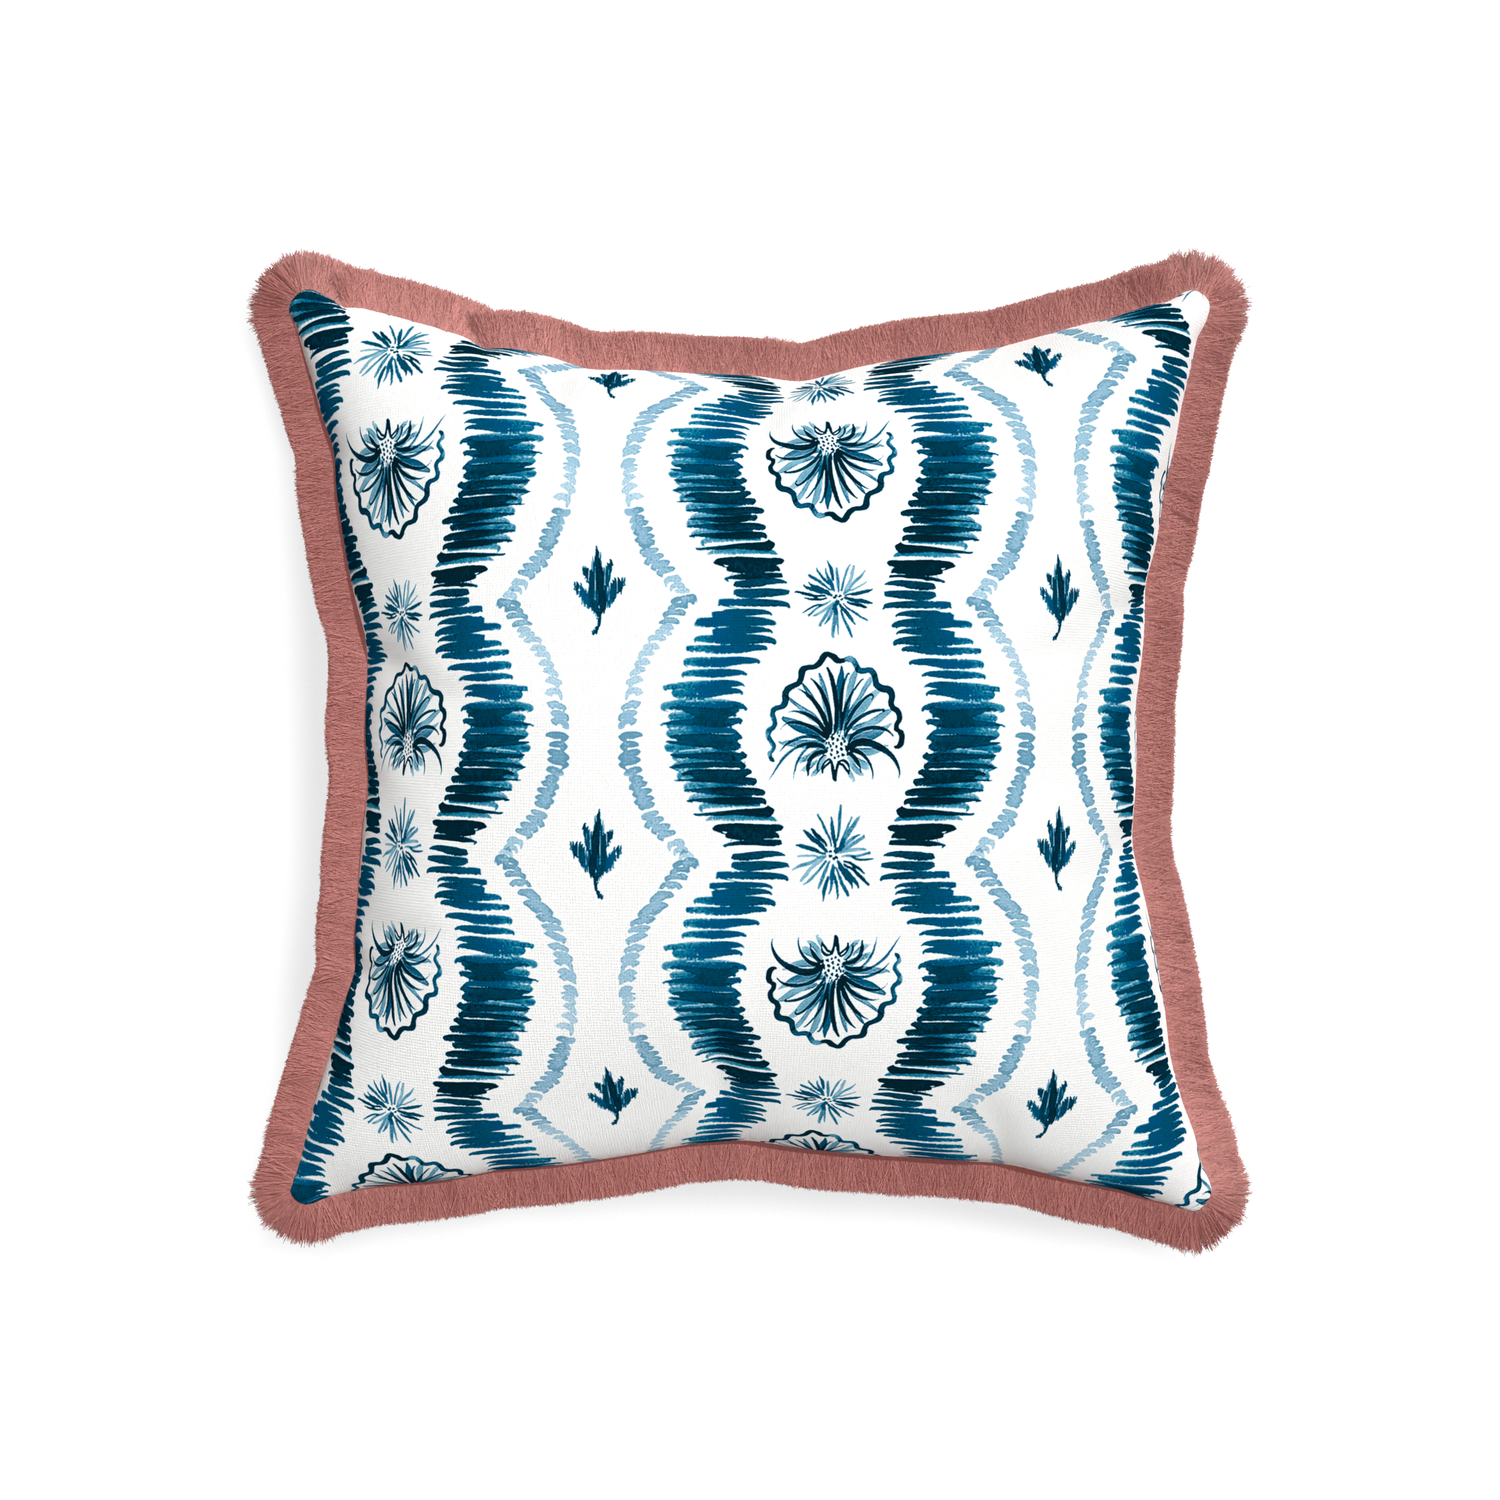 20 inch Square Blue Ikat Stripe Pillow with dusty rose fringe